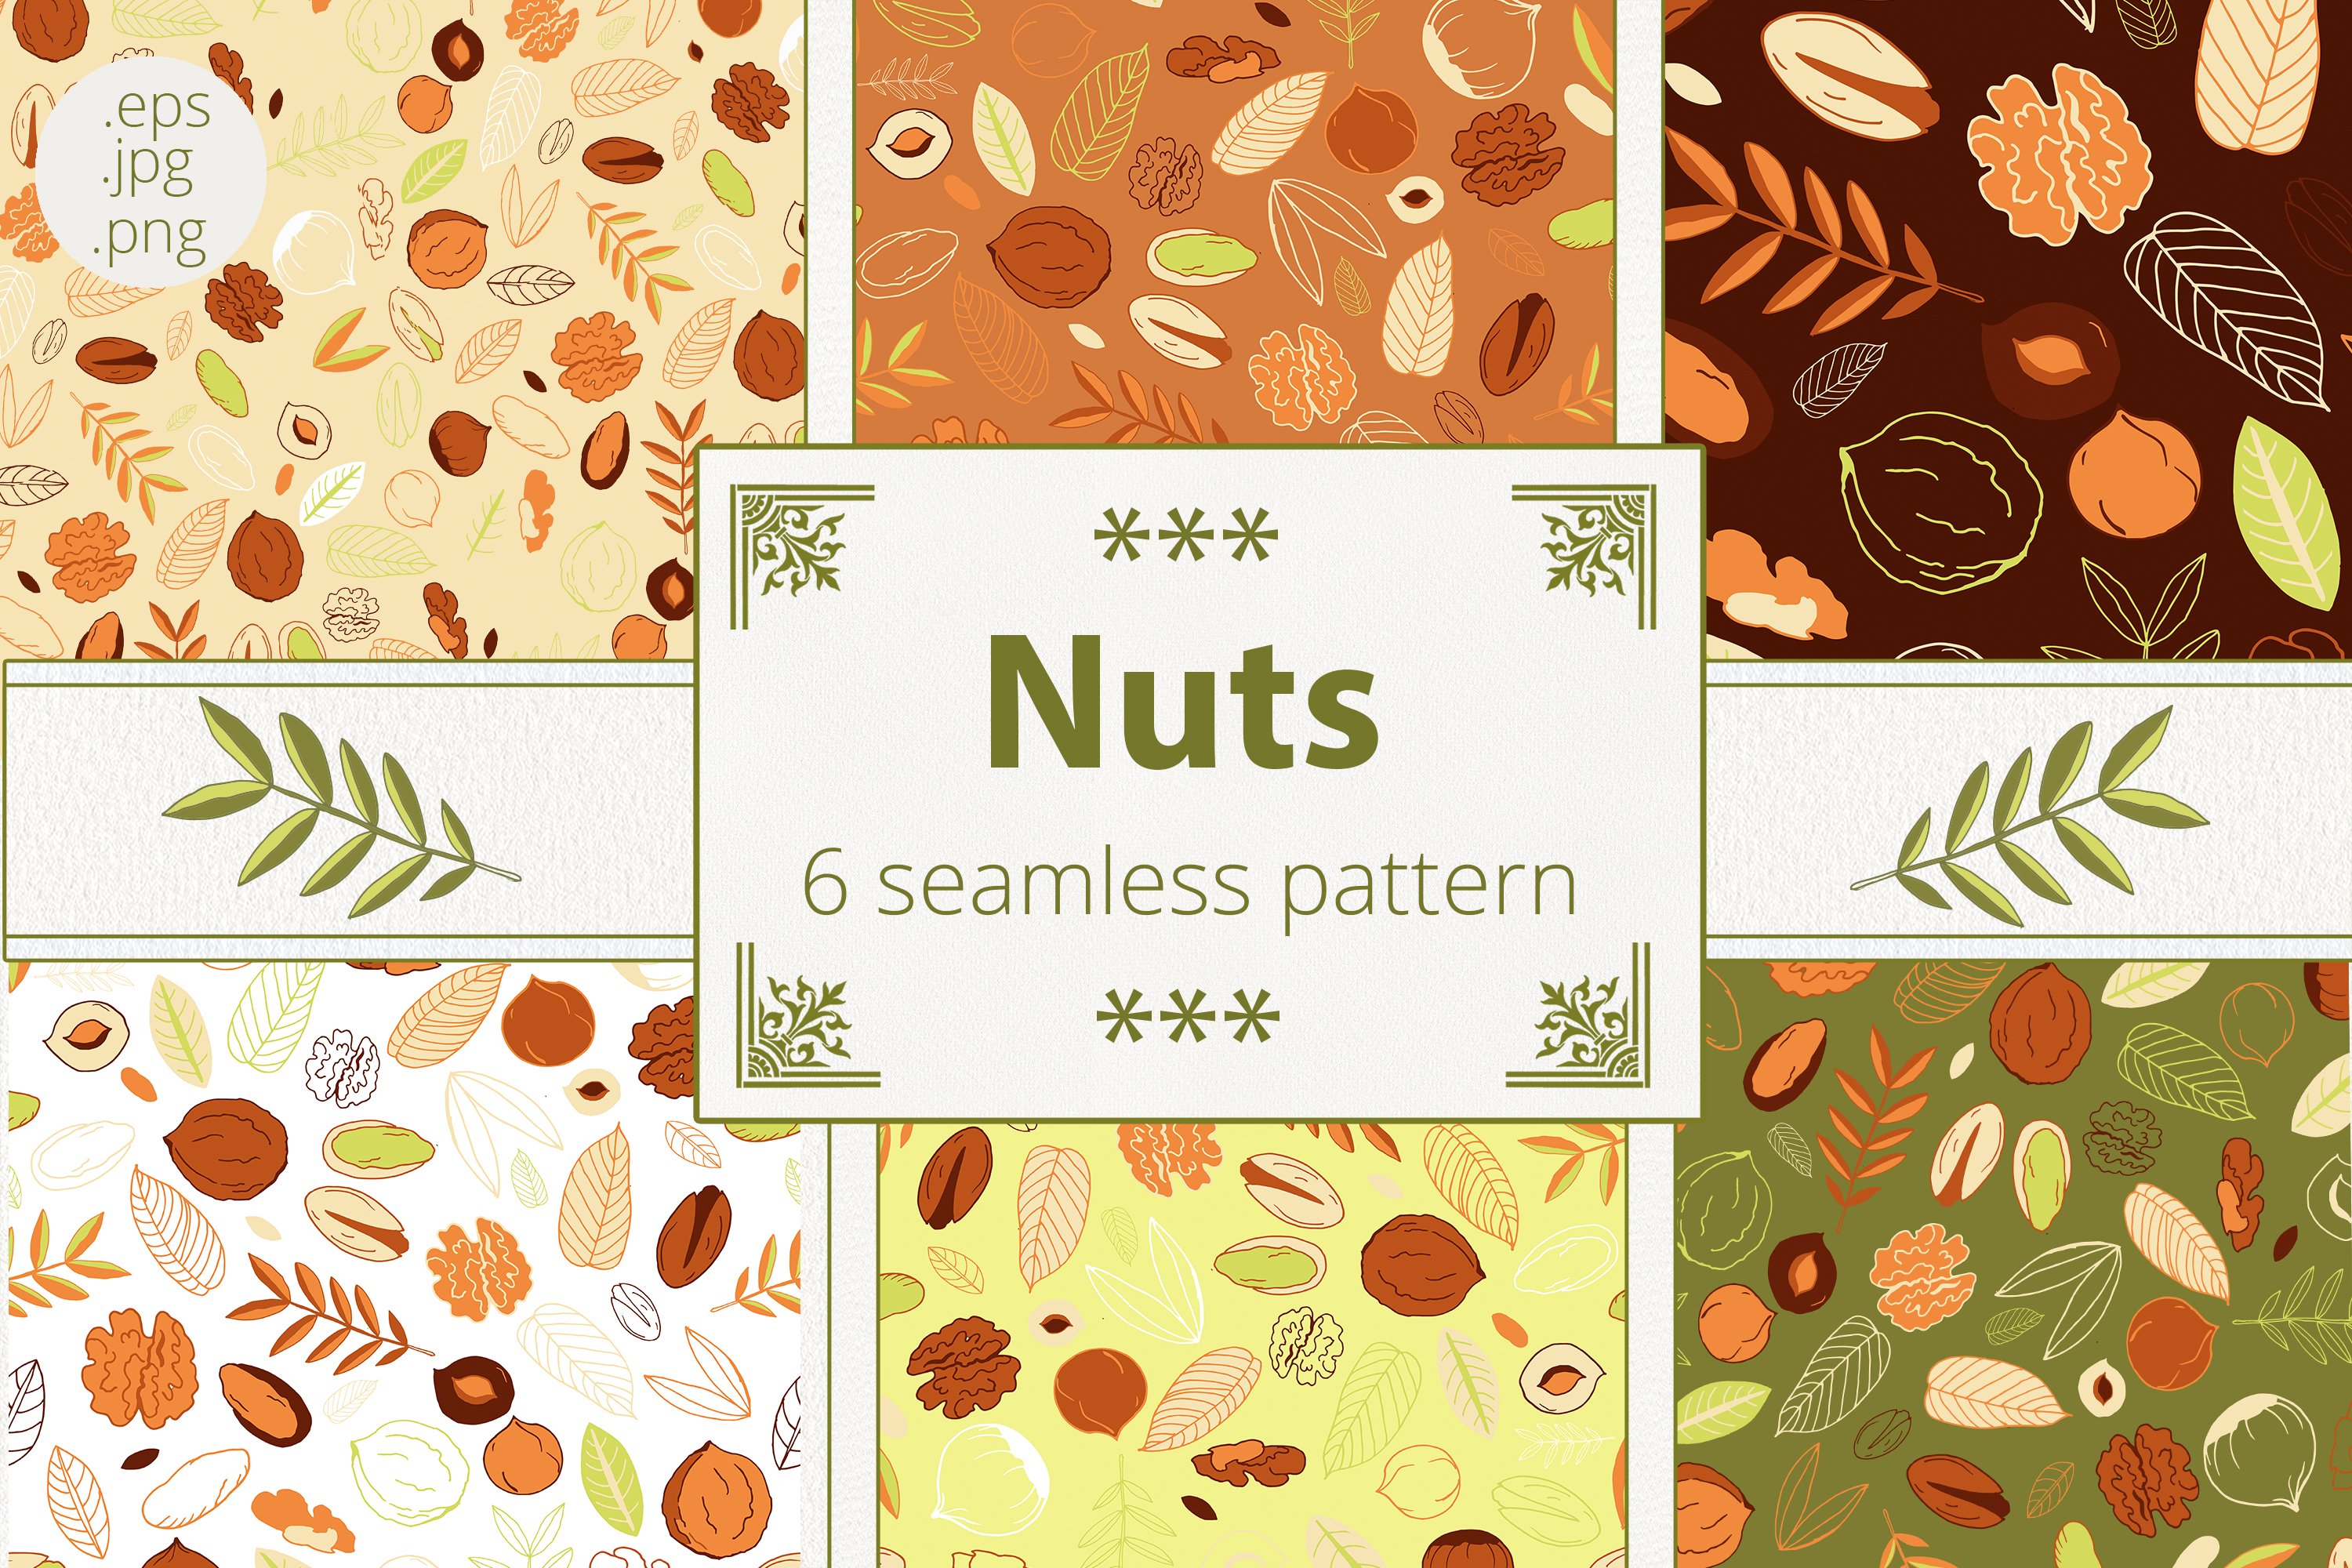 Green lettering "Nuts 6 Seamless Pattern" and different 6 seamless patterns on a white background.